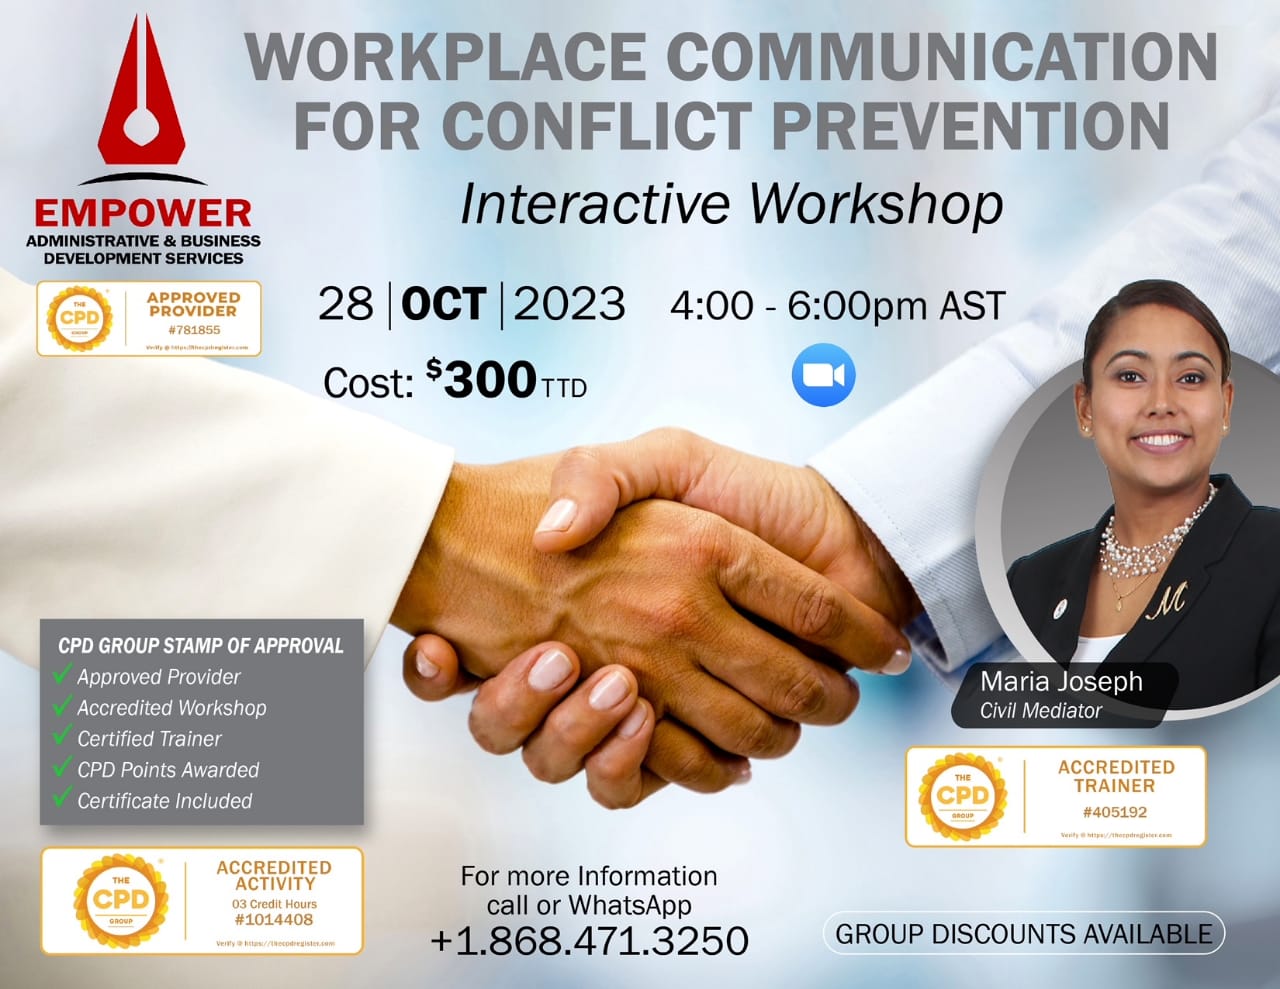 WORKPLACE COMMUNICATION FOR CONFLICT PREVENTION, EMPOWER ADMINISTRATIVE & BUSINESS DEVELOPMENT SERVICES , 